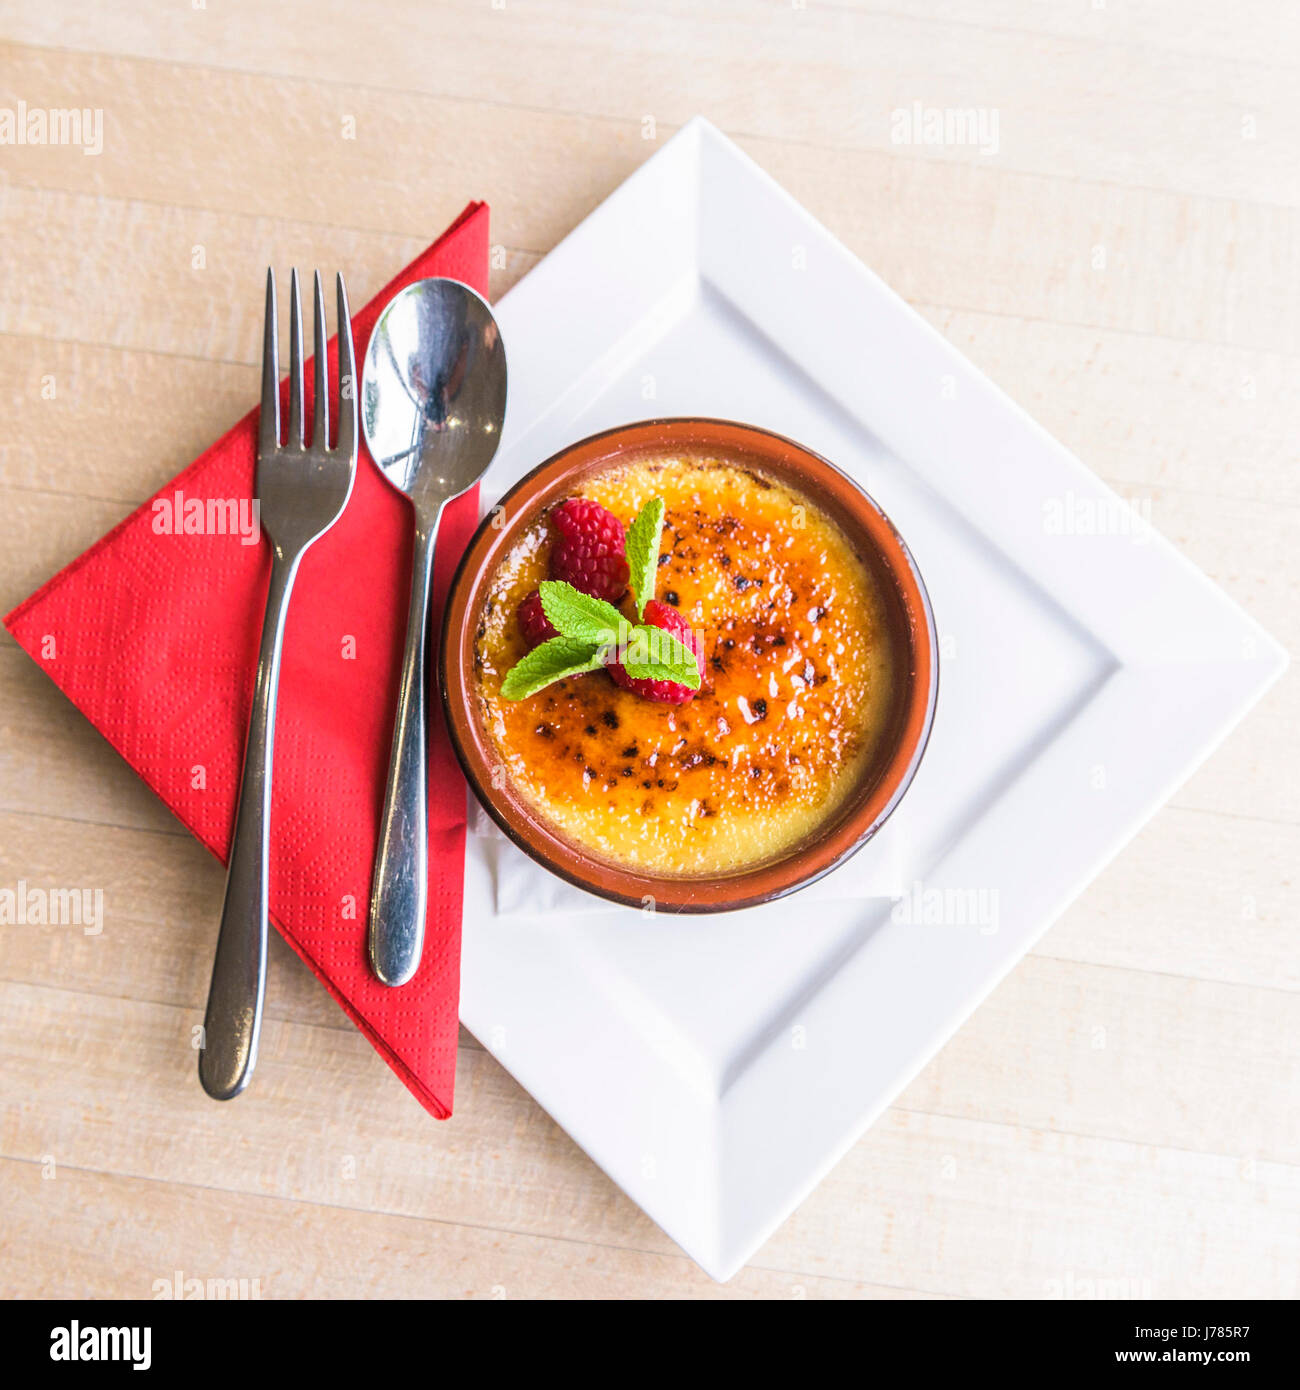 A Creme Brulee served in a restaurant; Dessert; Food; Sweet; Pudding; Cutlery; Rasberries; Tasty; Attractive presentation; Treat; Indulgence; Luxury Stock Photo